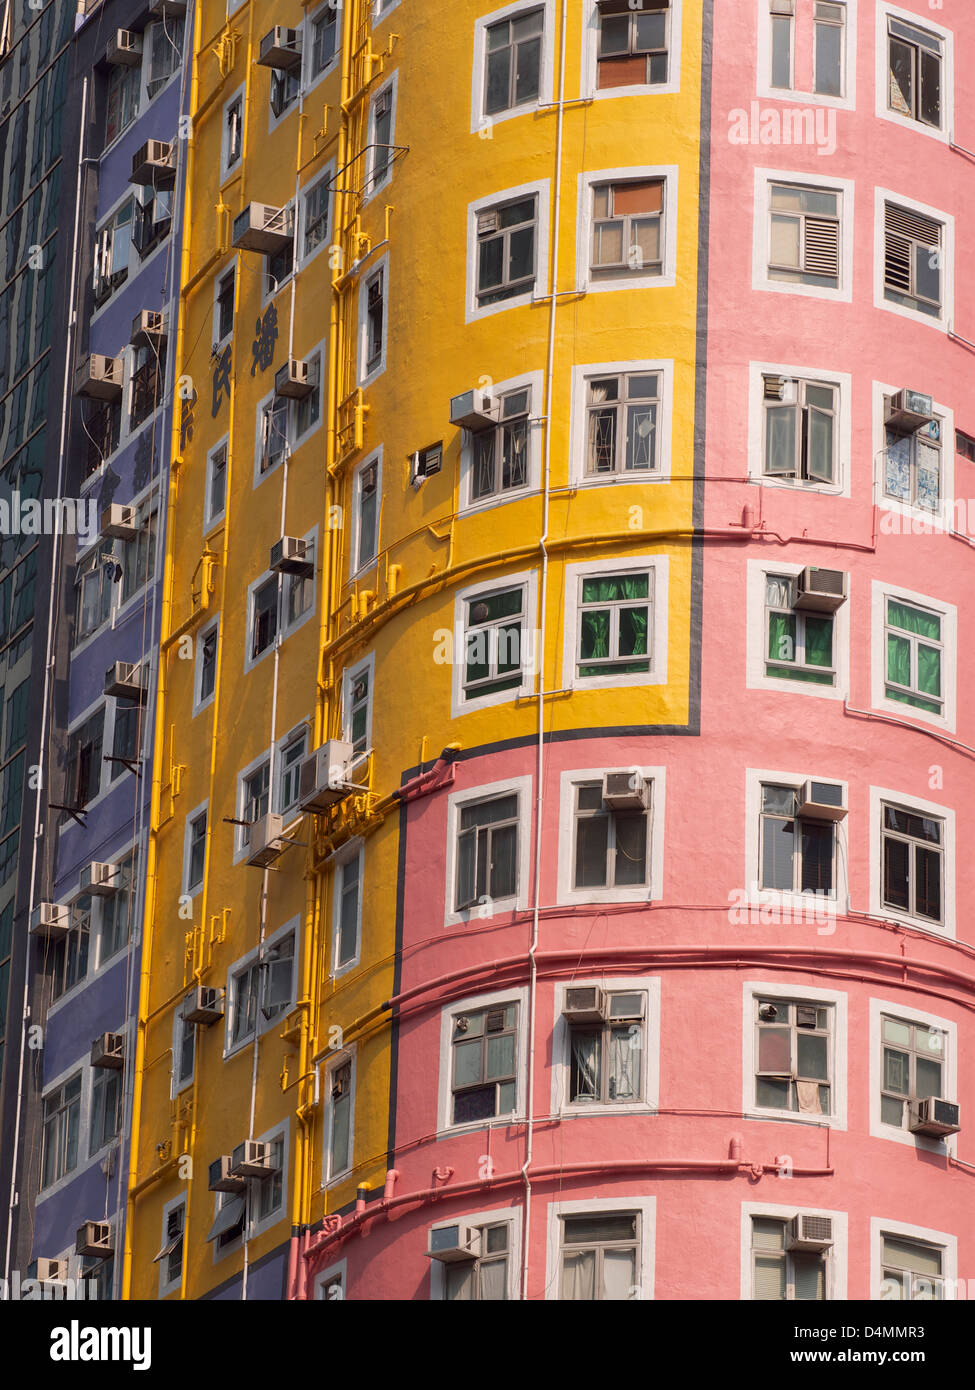 Newly redecorated building in Wan Chai, Hong Kong Stock Photo - Alamy